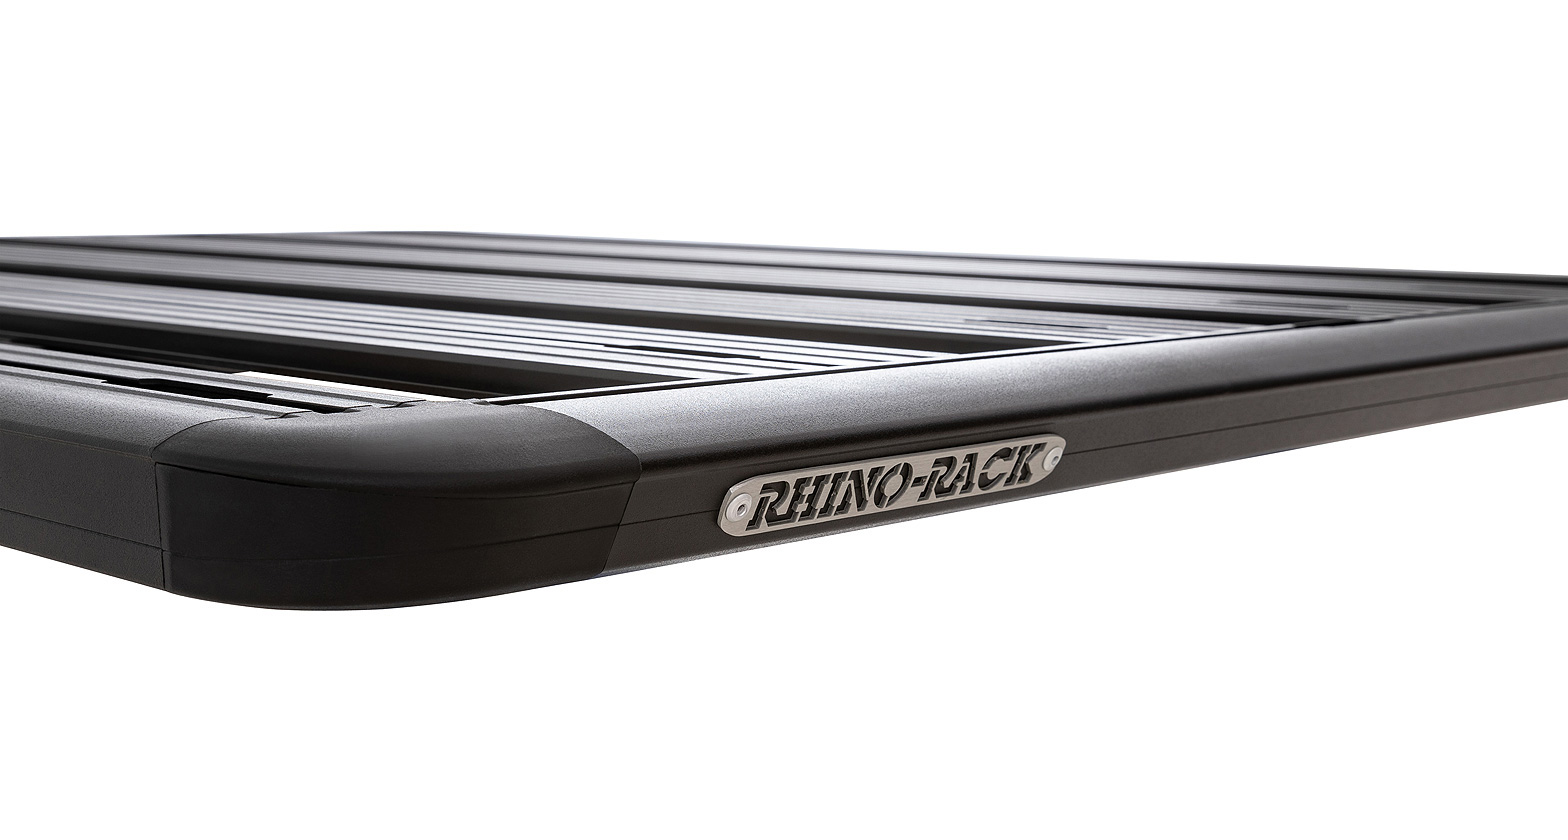 Rhino Rack JB1365 Pioneer Platform (2128mm x 1236mm) with Backbone for Toyota Land Cruiser Prado 5dr 120 Series with Bare Roof (2002 to 2009) - Factory Point Mount